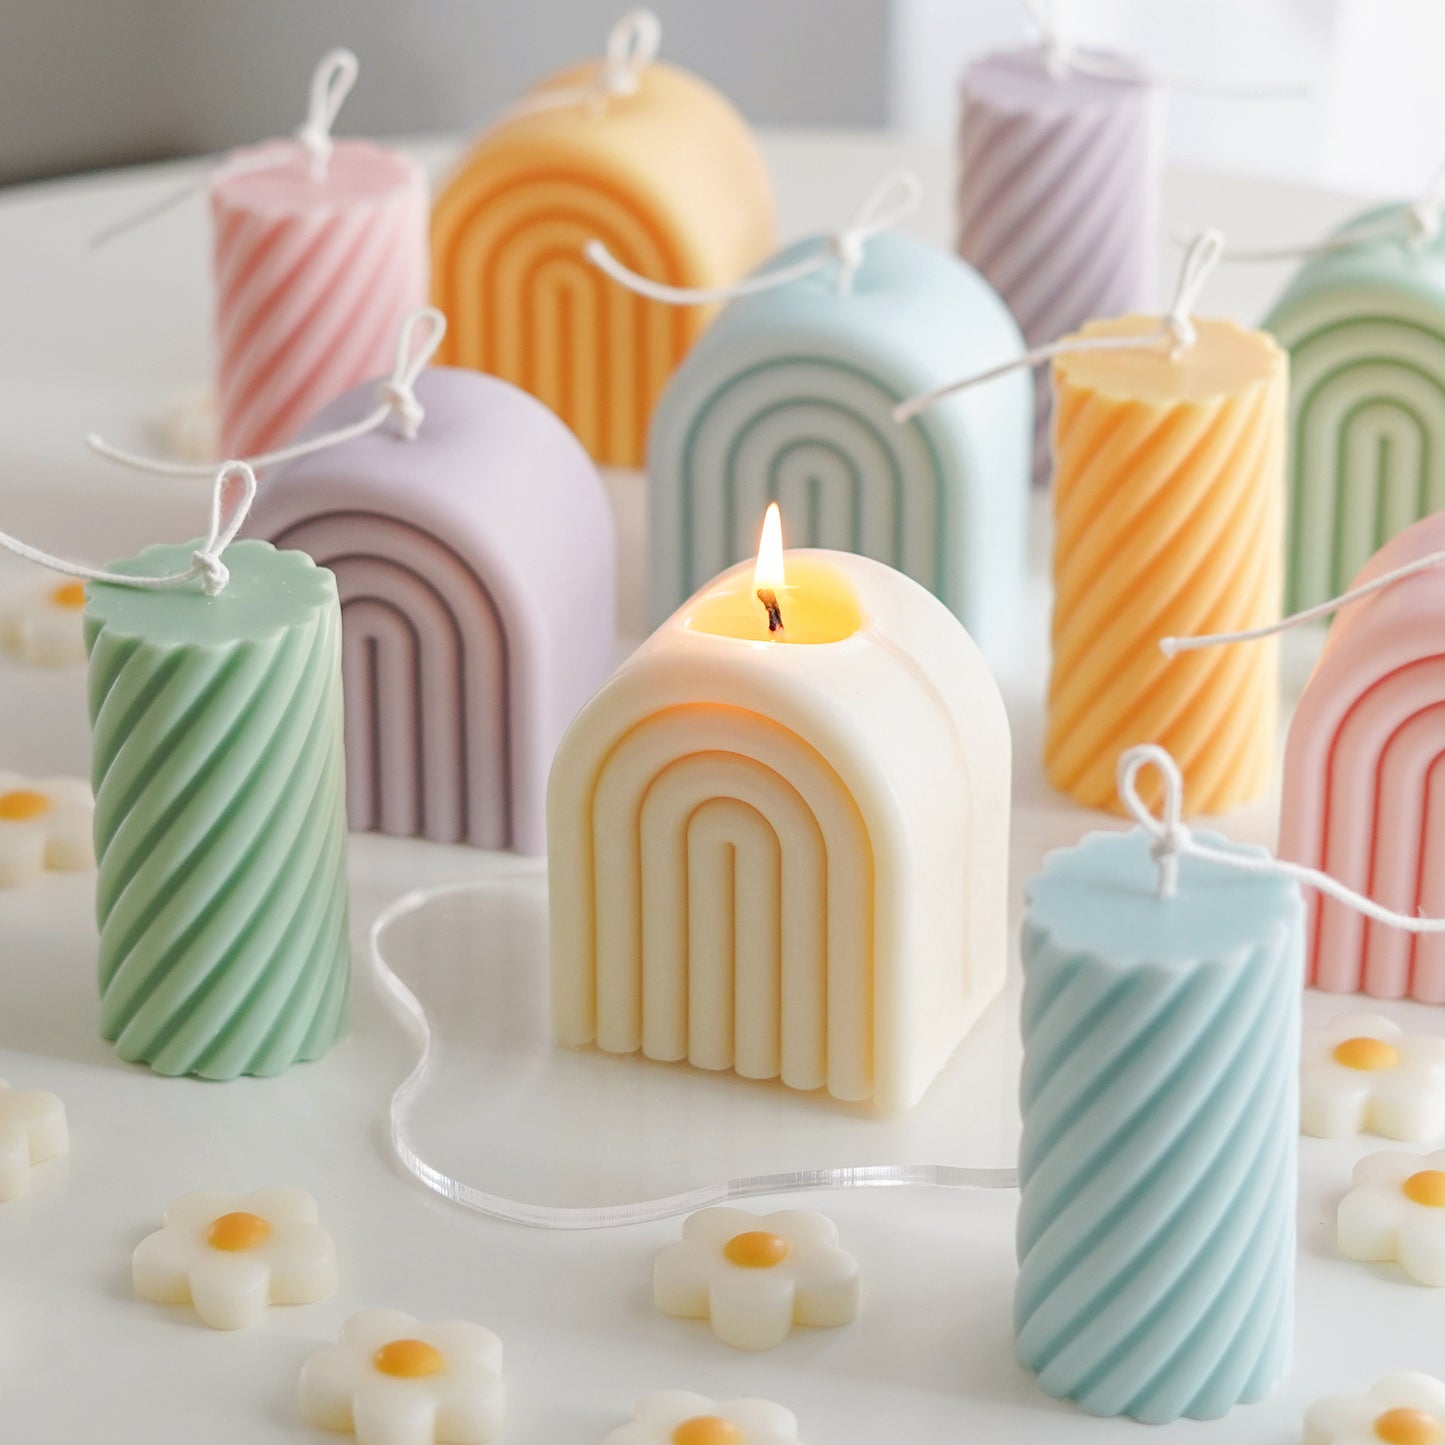 lit white rainbow soy pillar candle on a clear wavy acrylic coaster, sage green, lavender, aqua blue, tangerine yellow, blush pink rainbow shaped soy pillar candles and spiral sculptural candles with long cotton wicks, and daisy flower shape wax melts on the white table